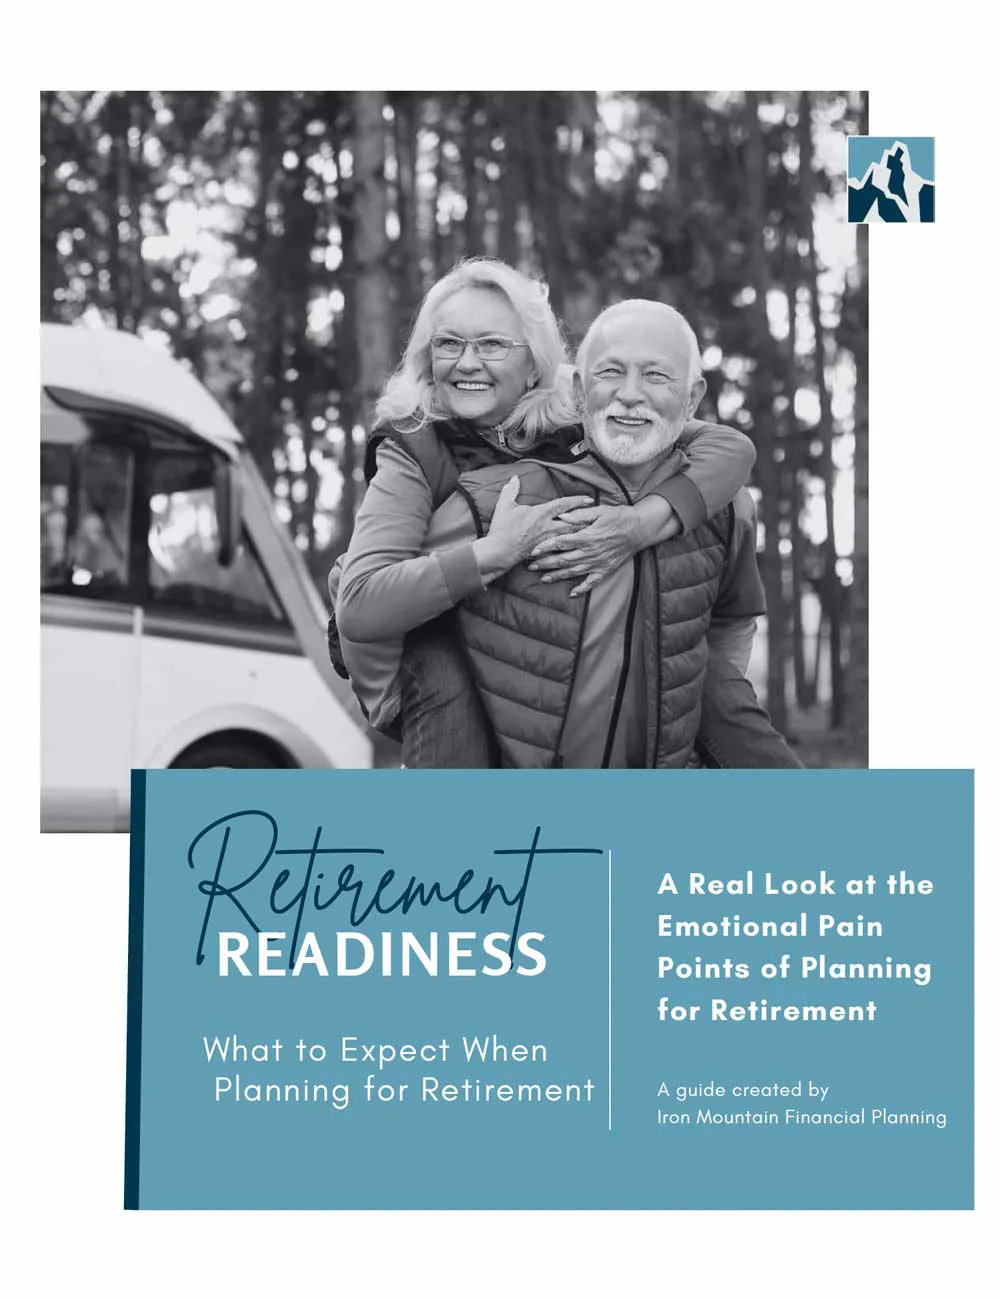 Retirement Readiness Planning Guide - FREE Download from Iron Mountain Financial Planning